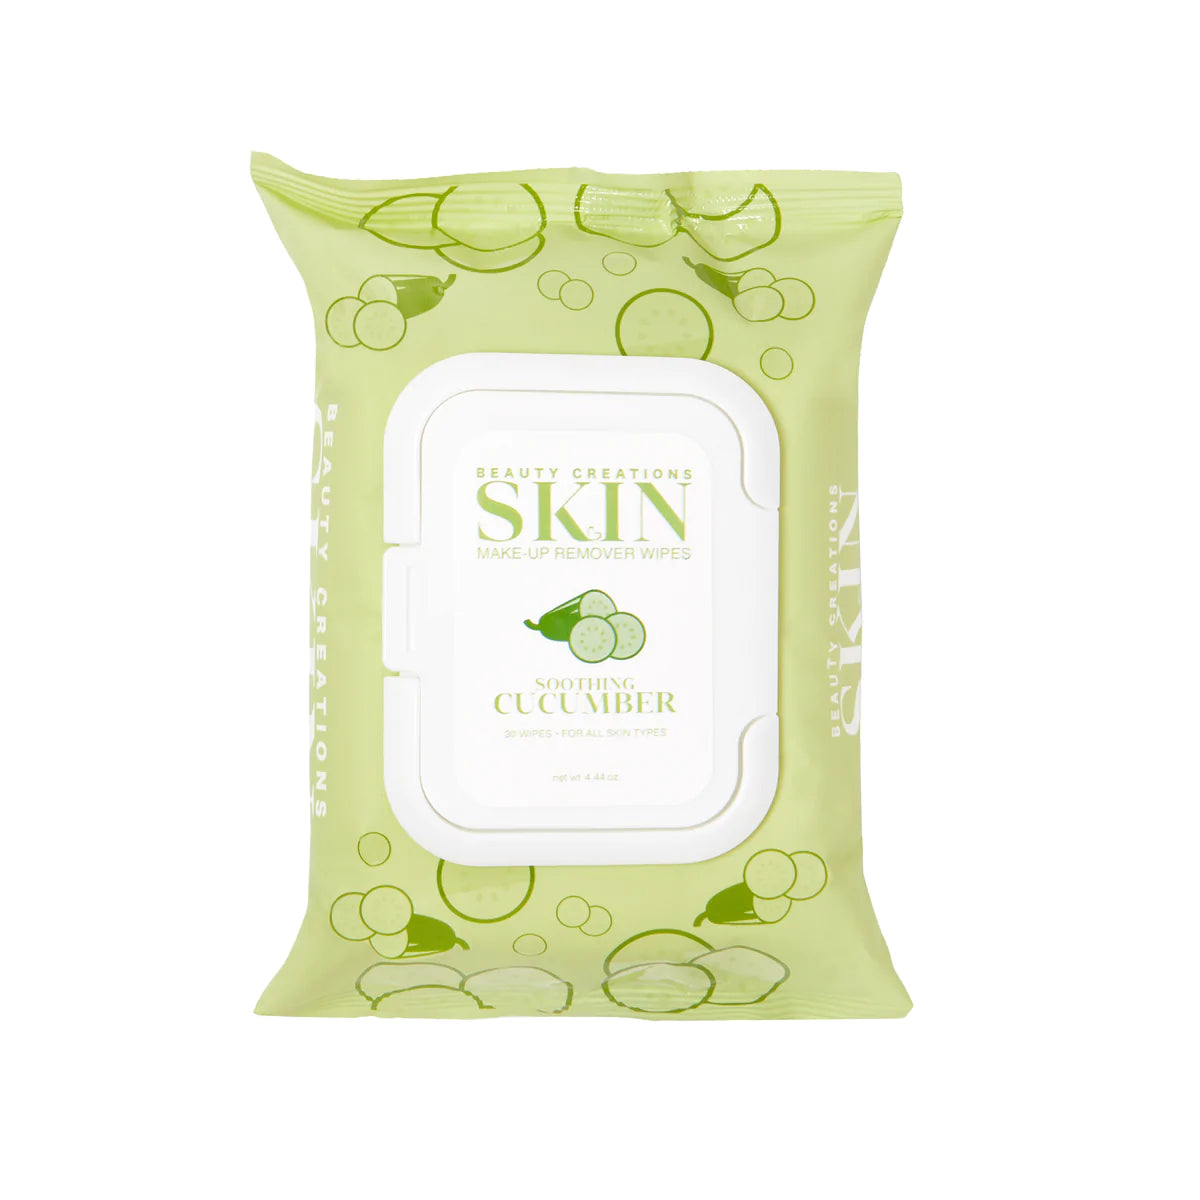 Beauty Creations SKIN MAKEUP REMOVER WIPES CUCUMBER